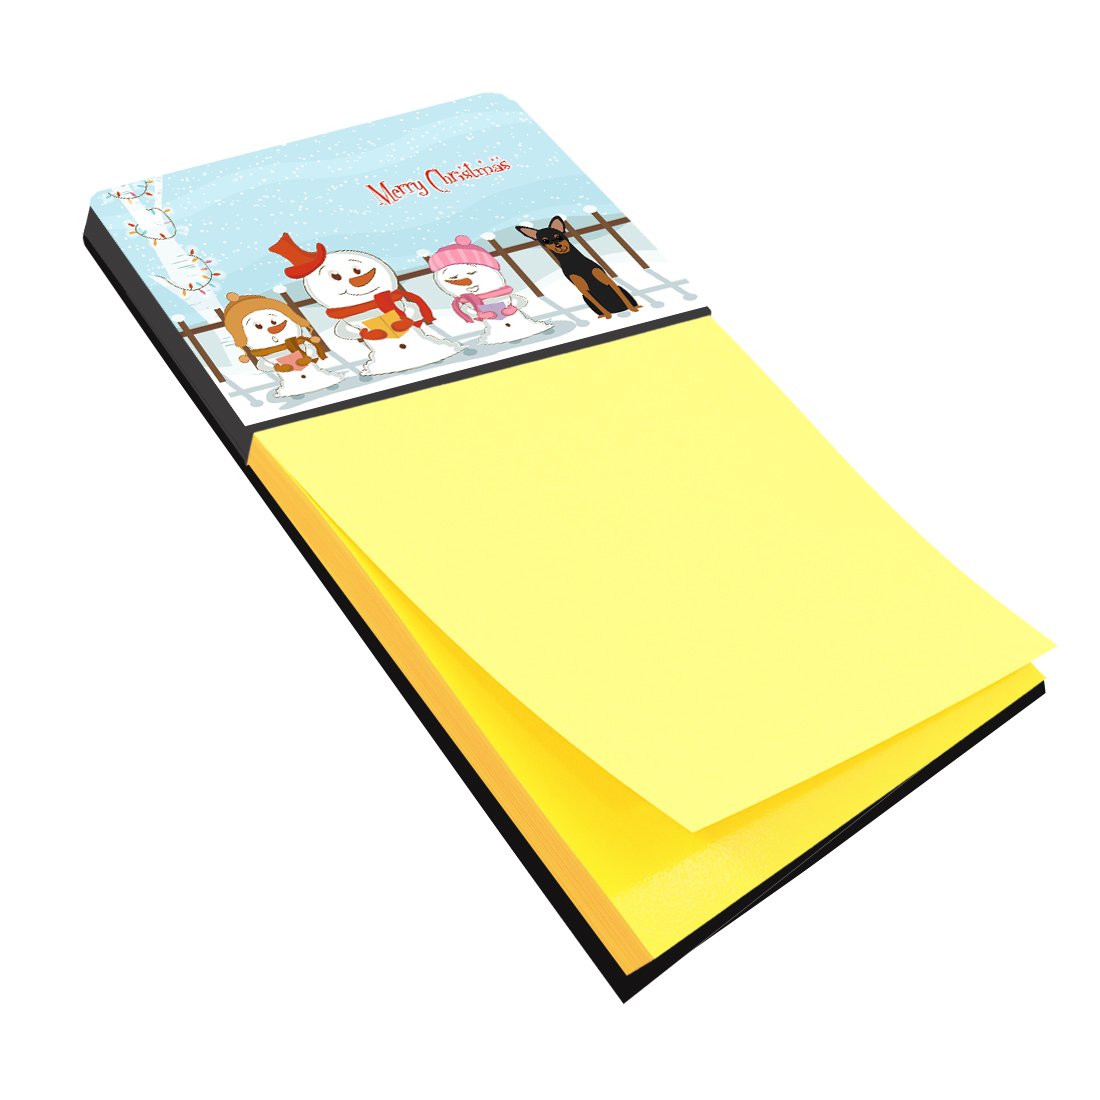 Merry Christmas Carolers Manchester Terrier Sticky Note Holder BB2359SN by Caroline's Treasures